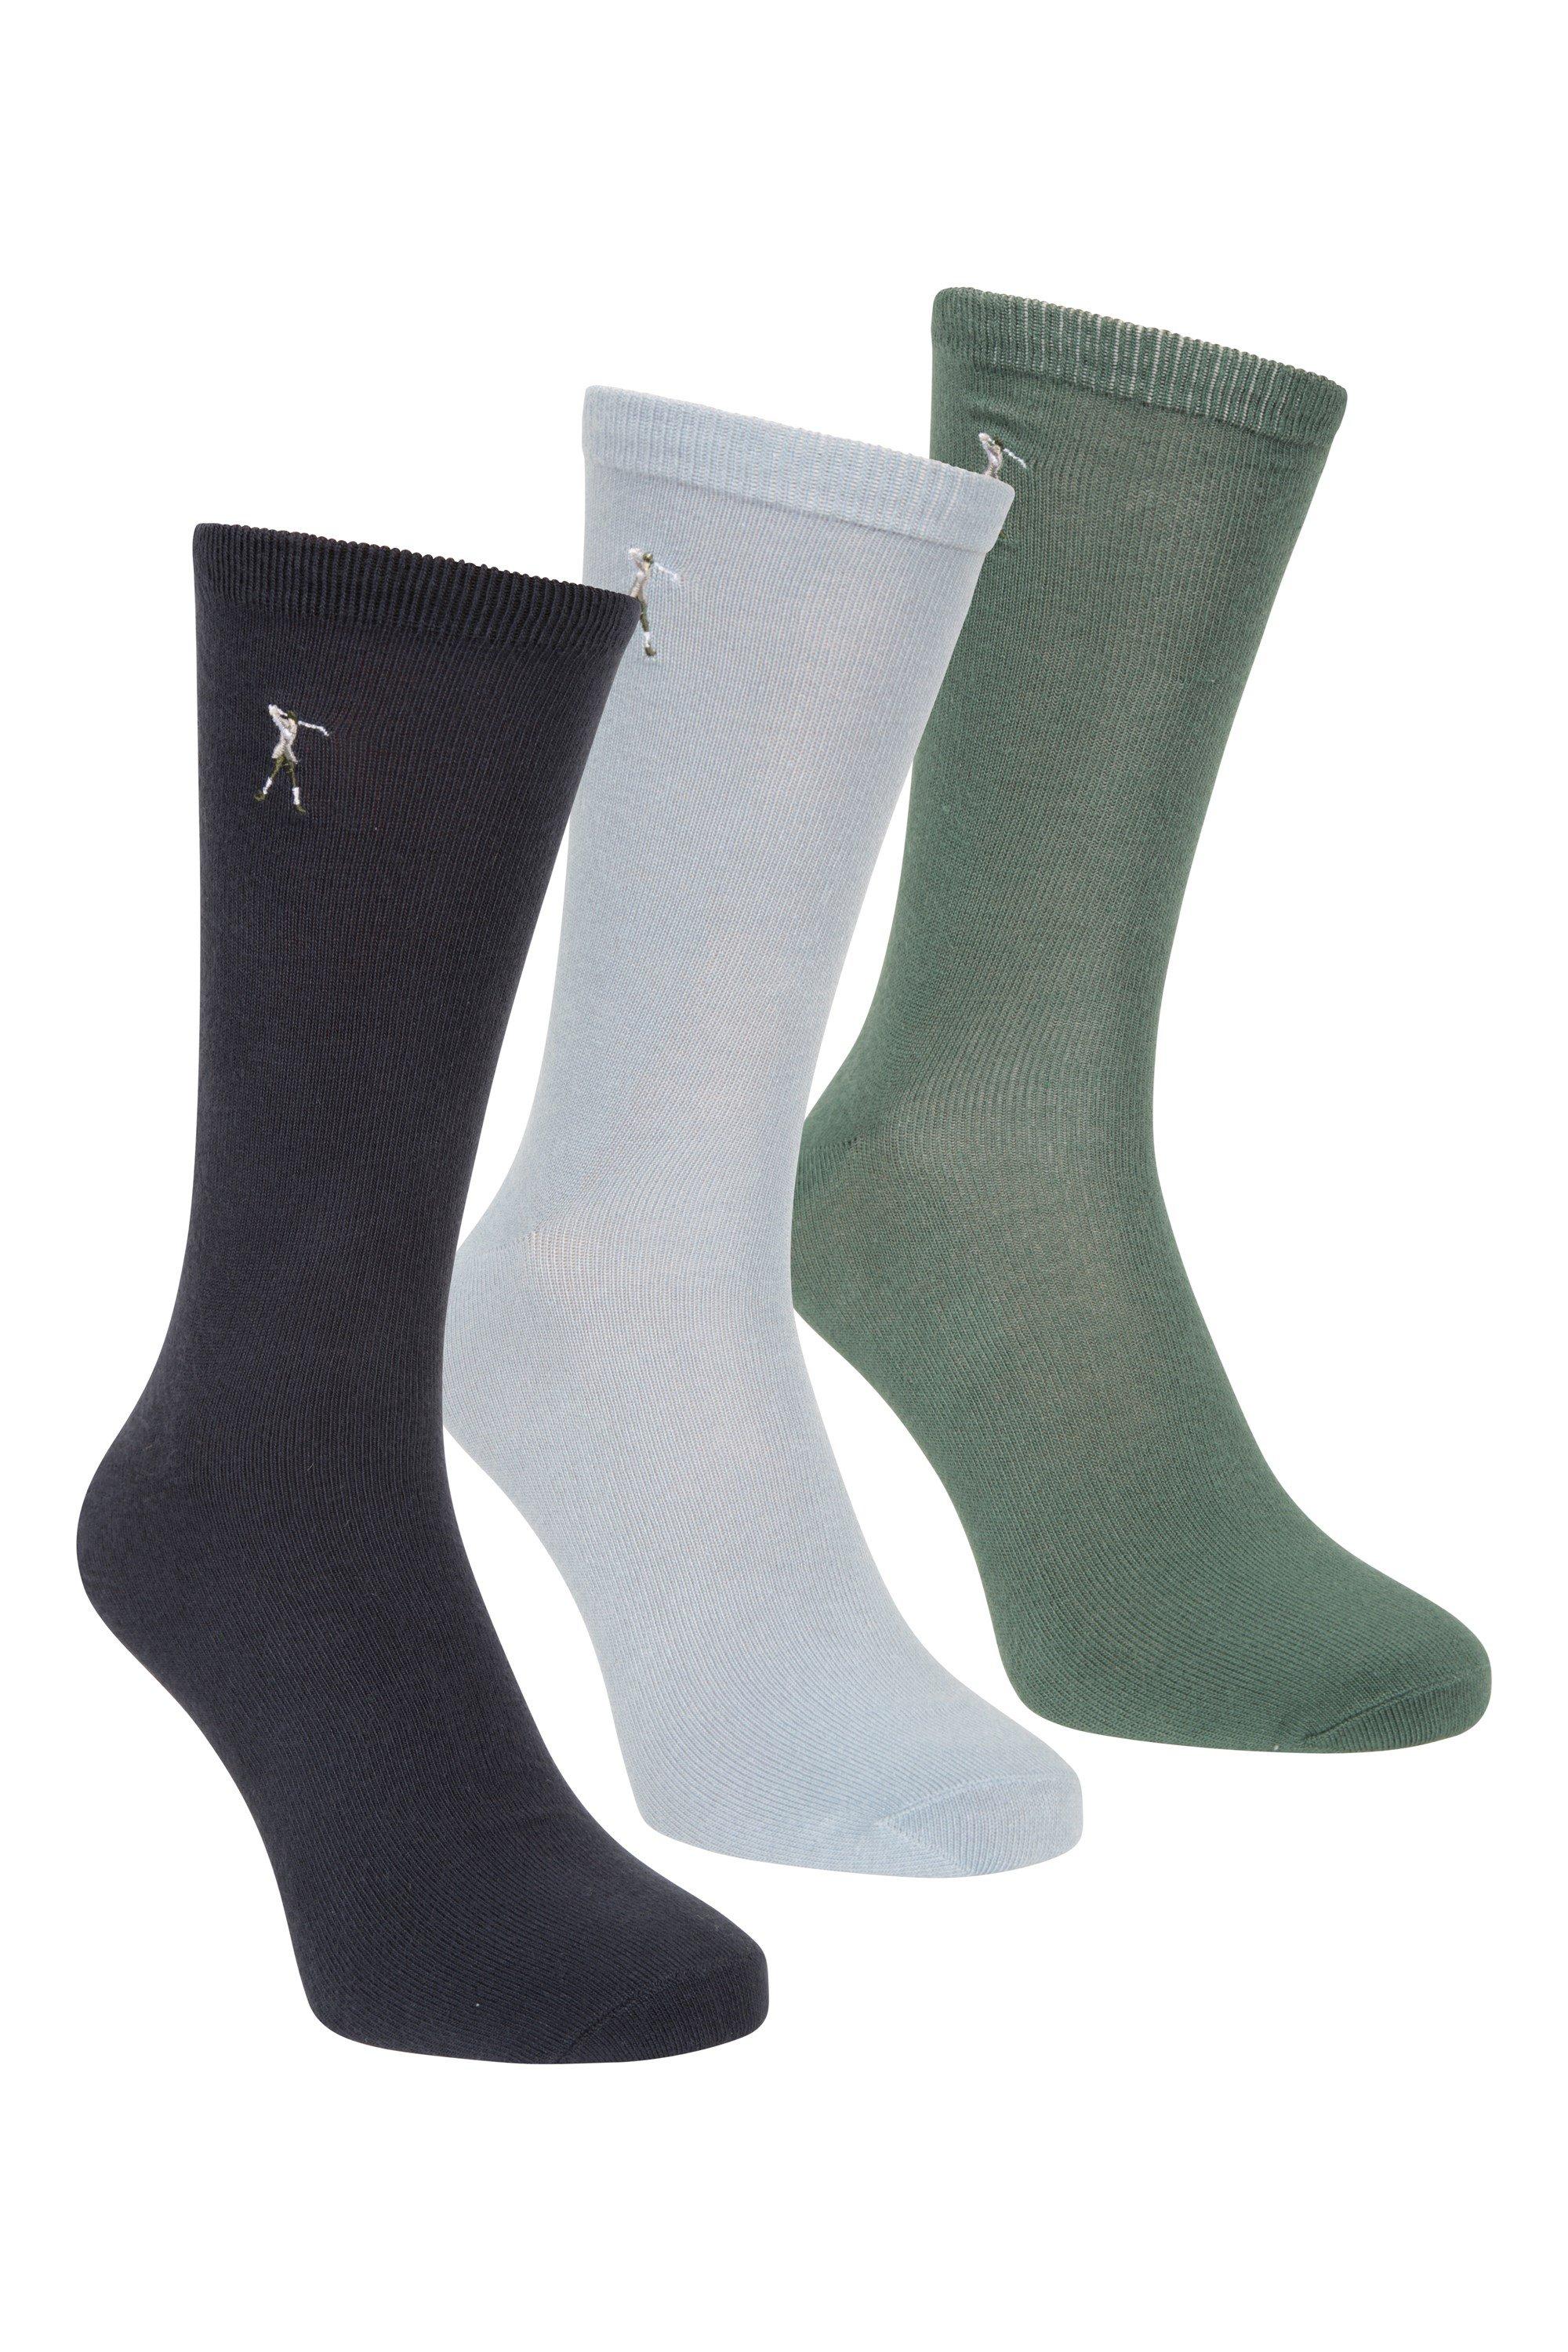 Golf Embroidered Socks Casual Bamboo Sock Pack of 3